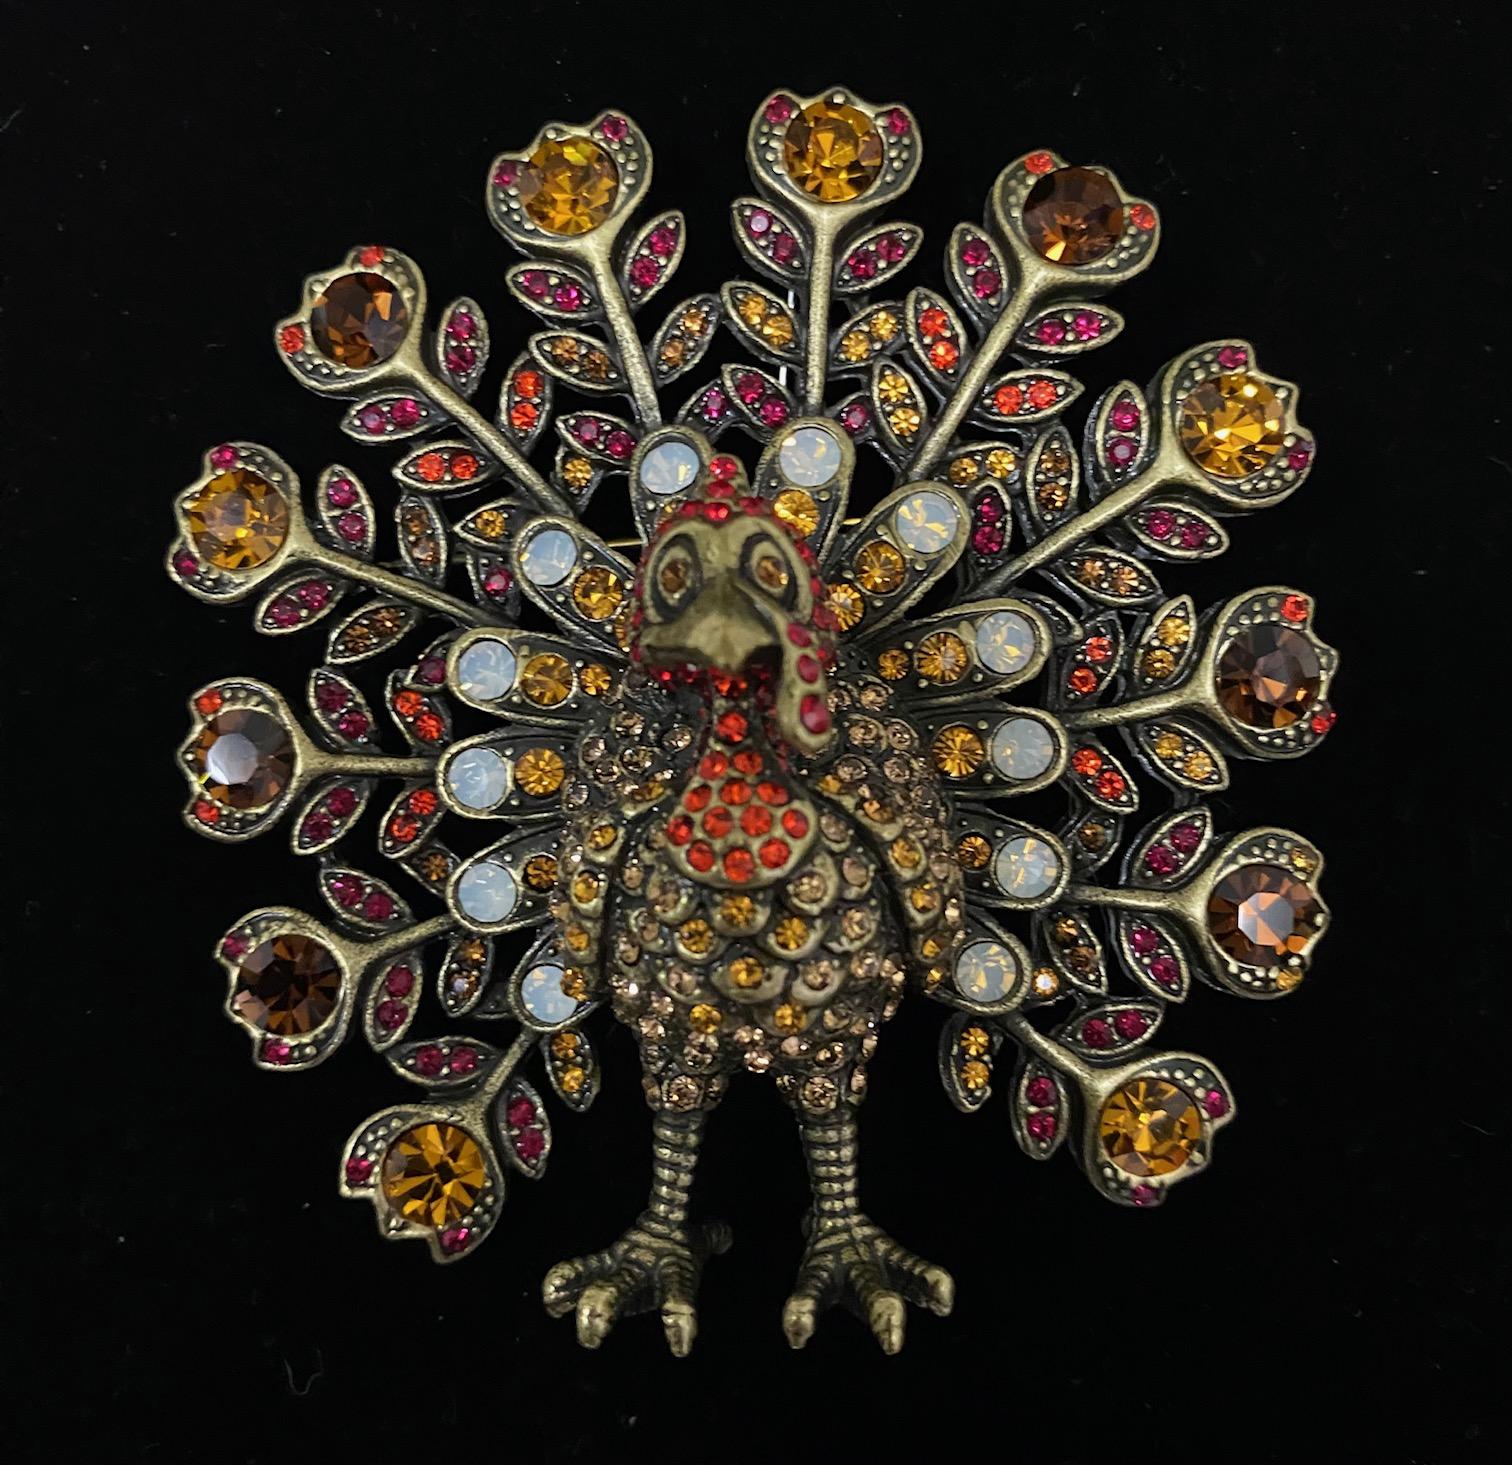 Gobble up this holiday feast of sparkle. Attached to your favorite fall scarf, pinned on an oversized lapel, or even used as a glamorous table decoration for the big feast, this whimsical Tom Turkey pin is sure to impress.

Design